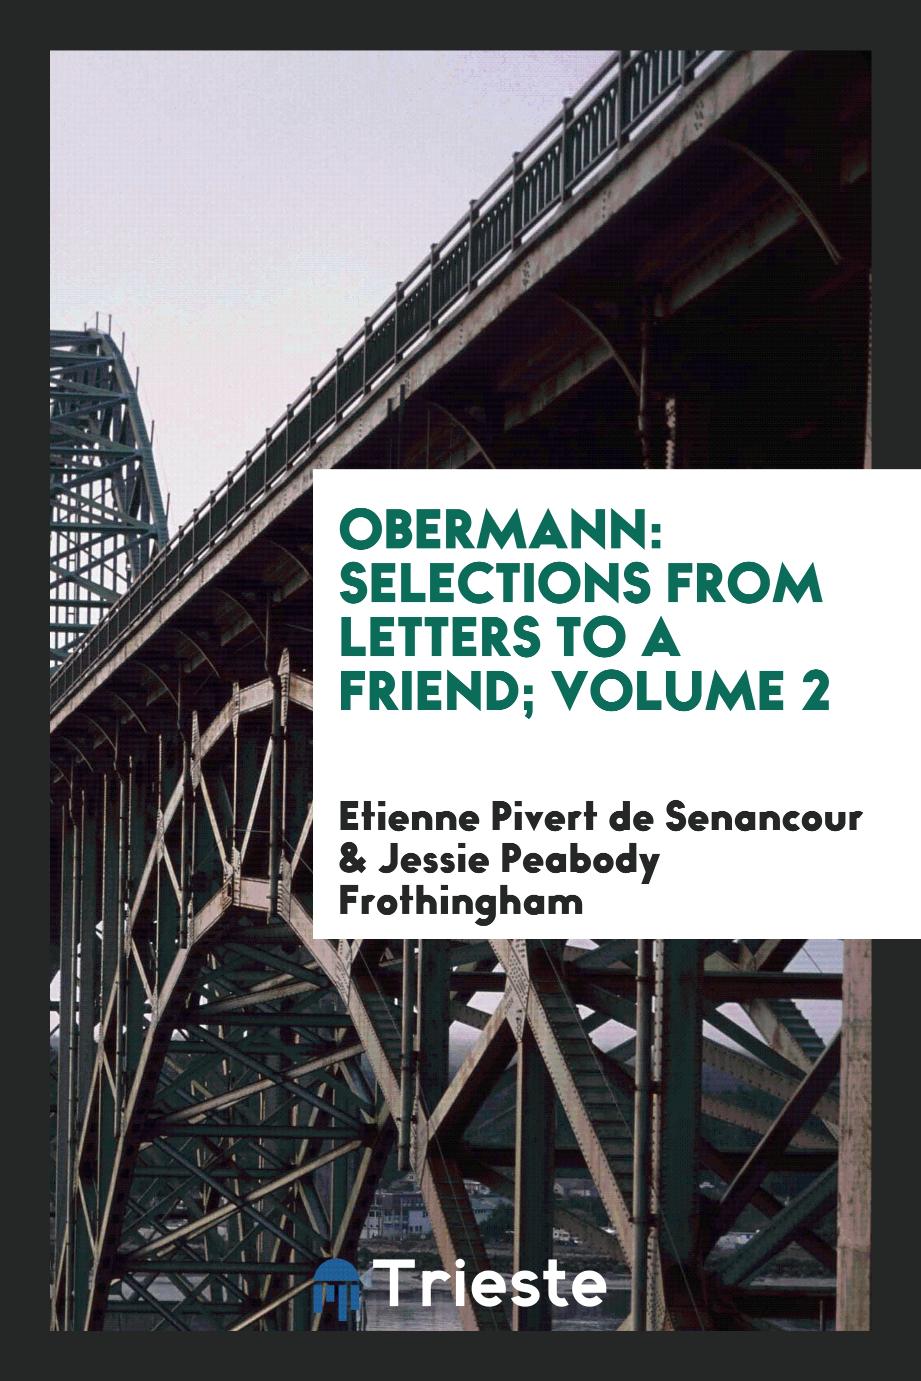 Obermann: selections from letters to a friend; Volume 2